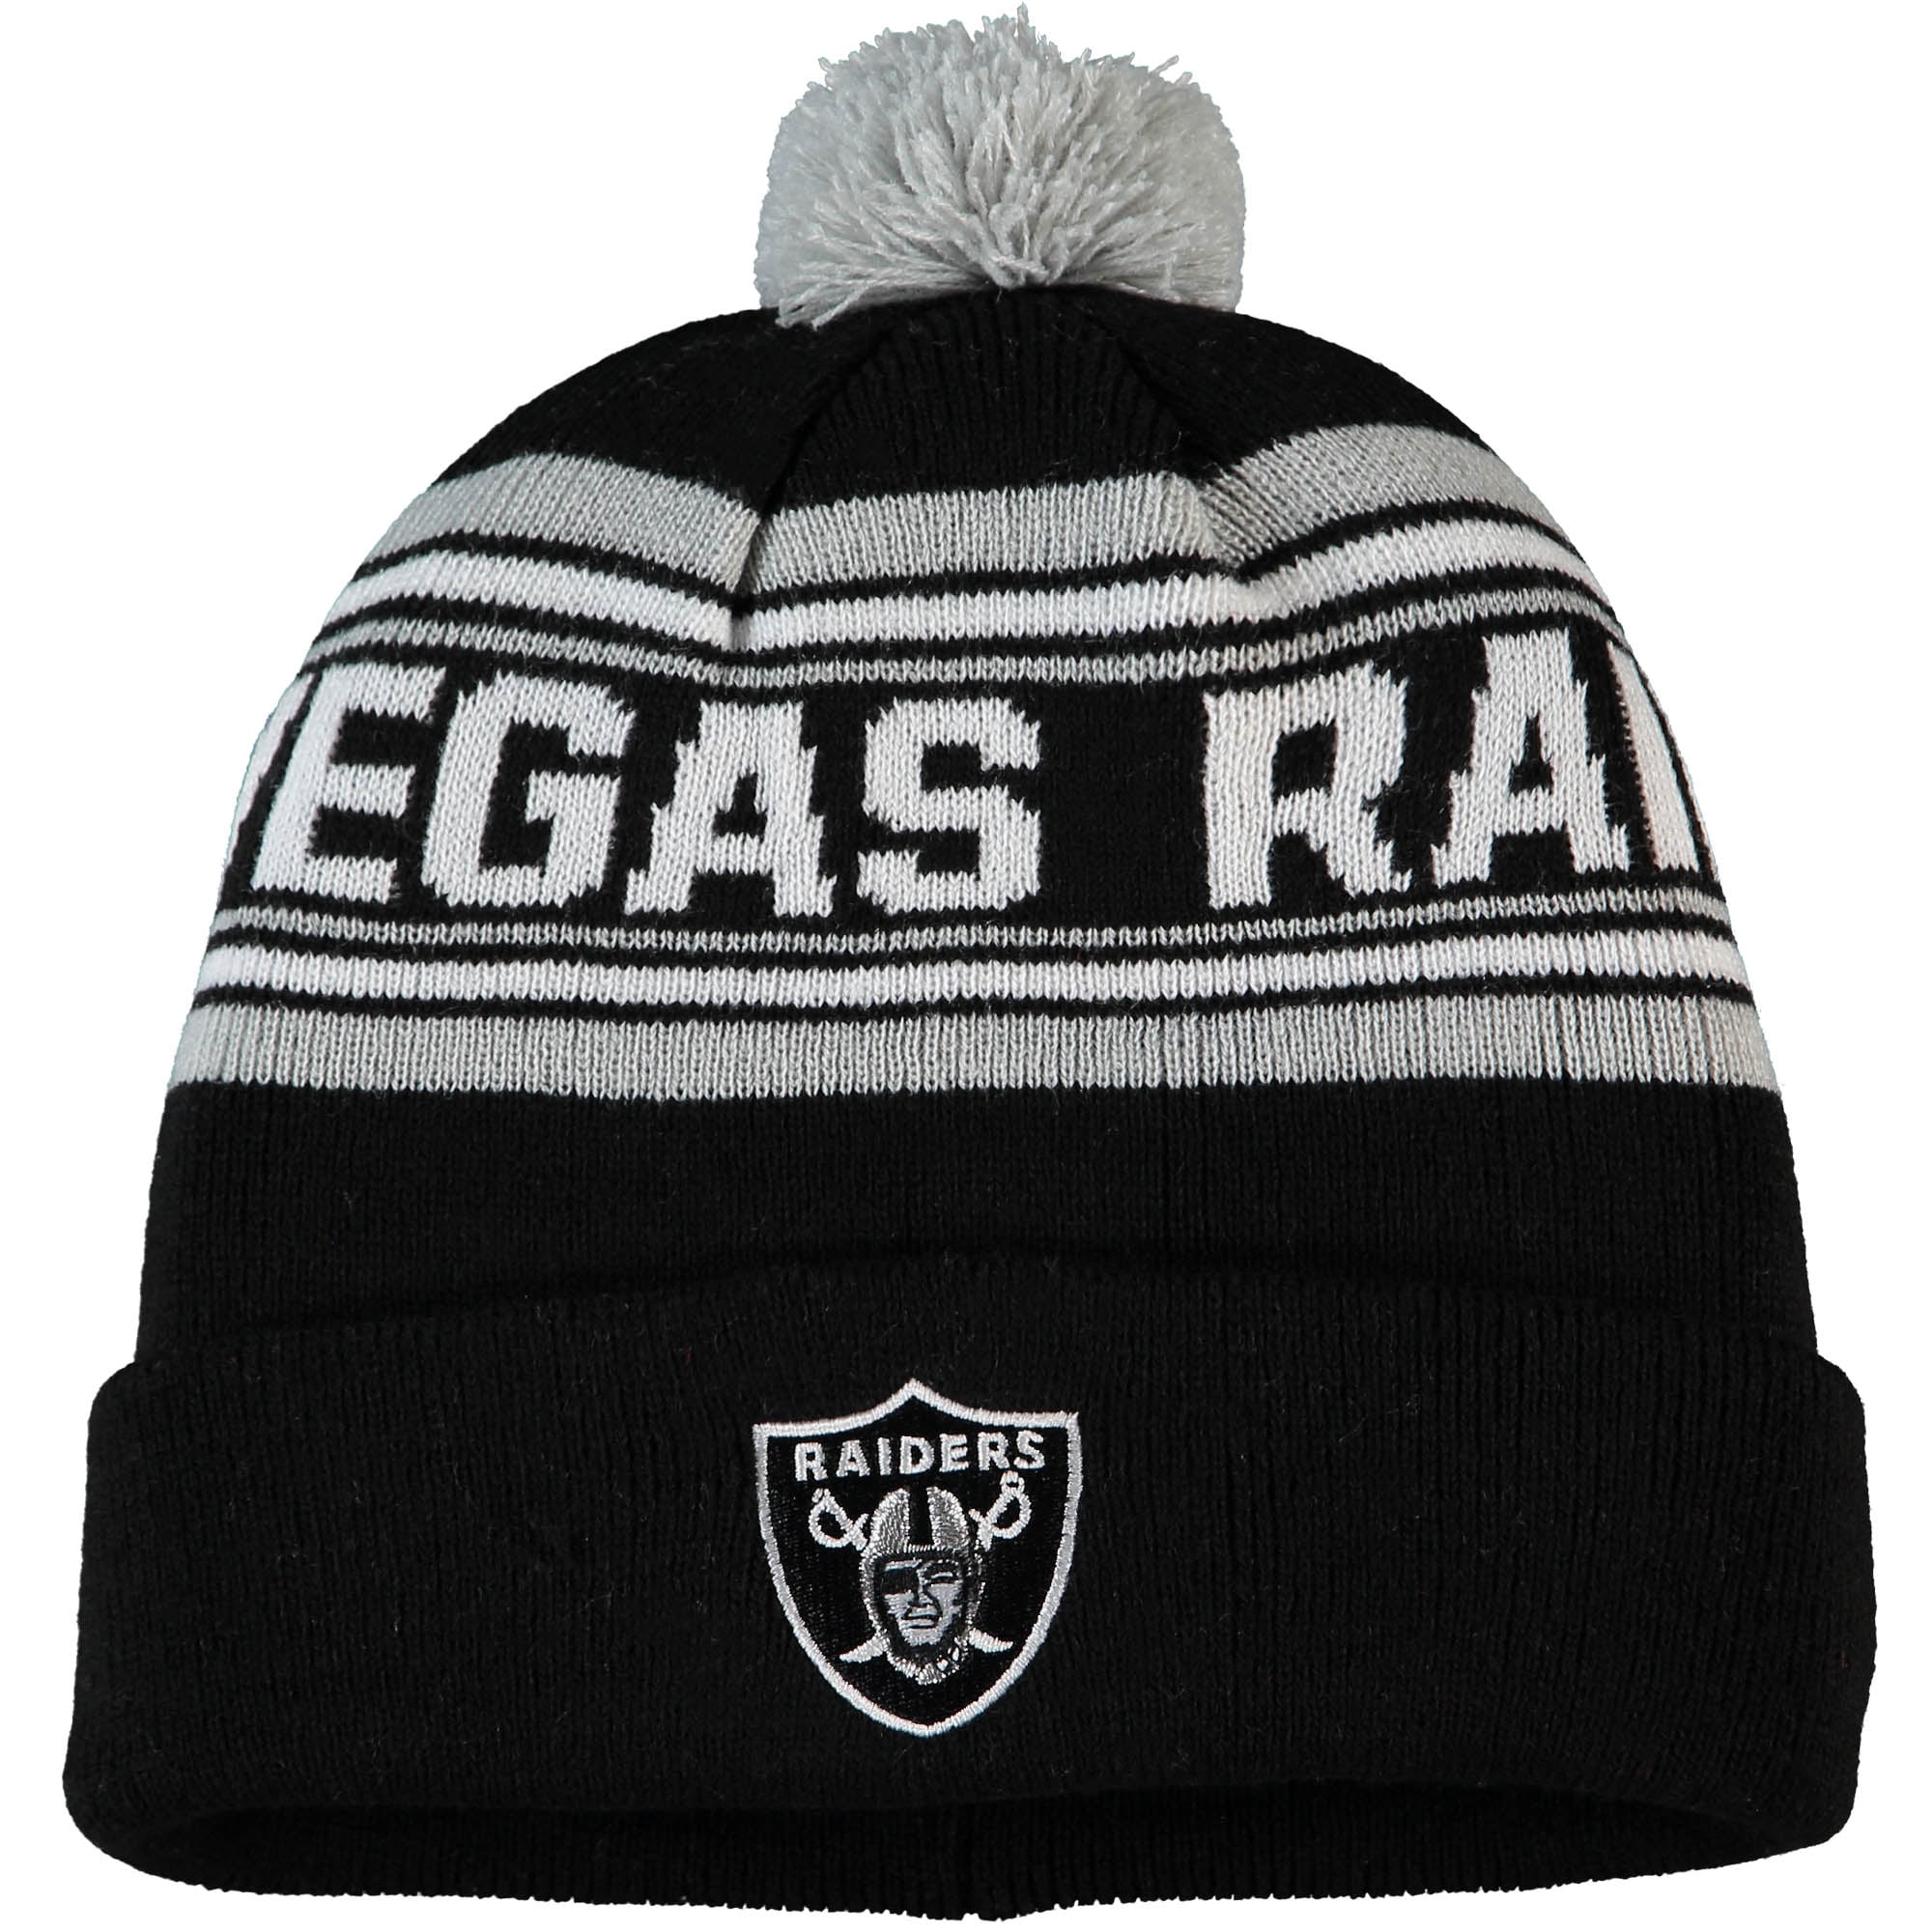 Outerstuff Oakland Raiders Kids & Youth Boys Jacquard Cuffed Knit Hat with Pom